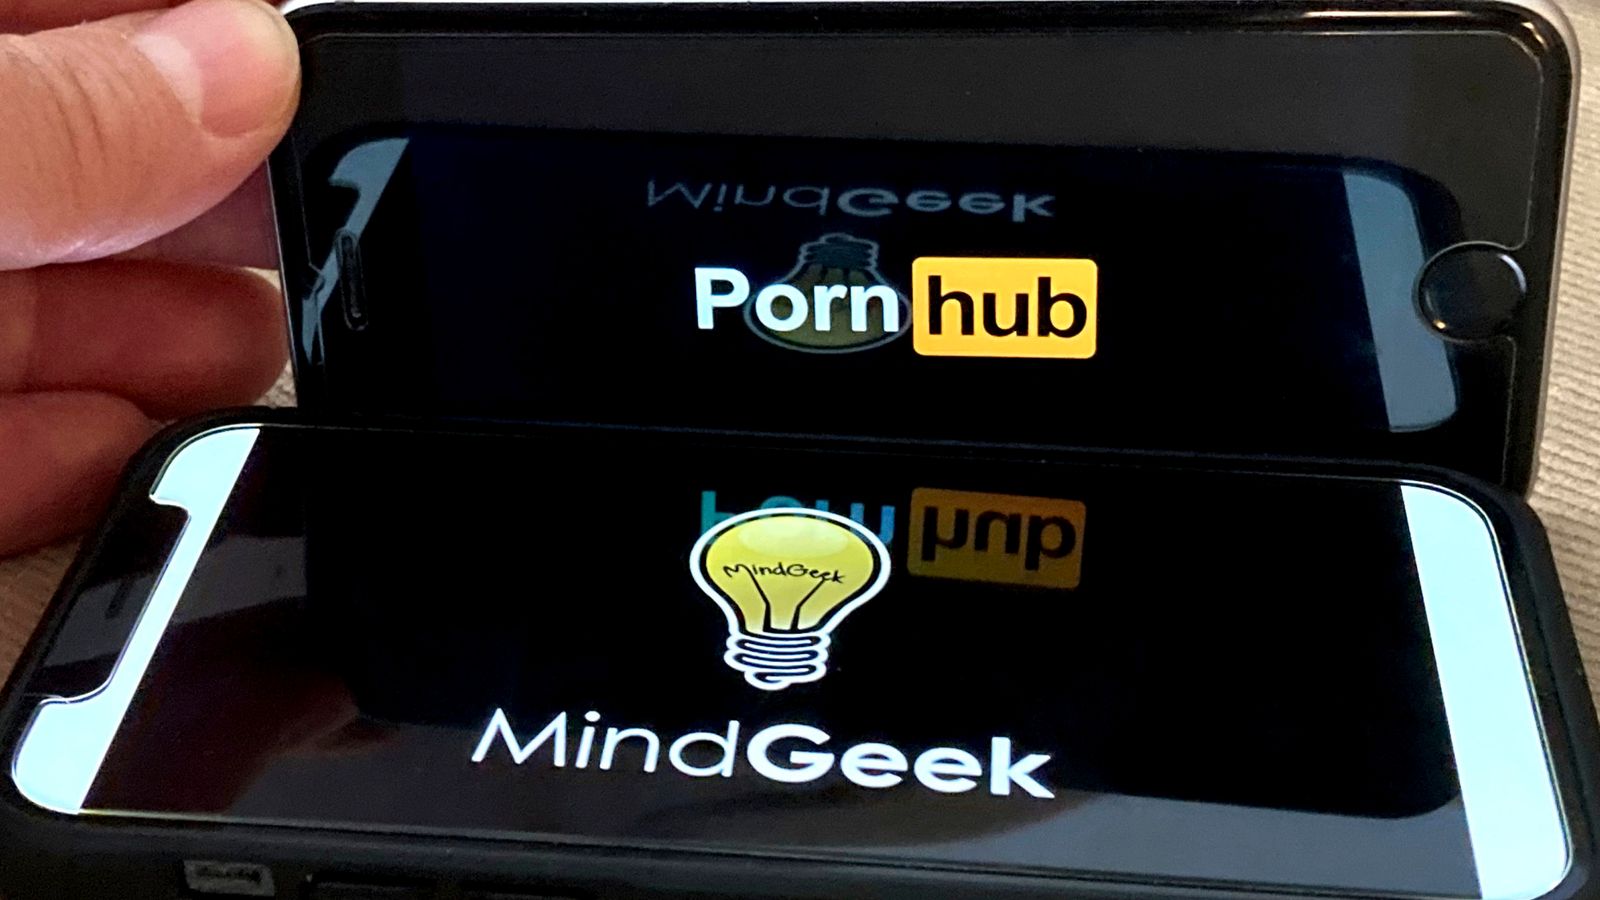 Owner of Pornhub admits to making over $864,000 from sex trafficking, agrees to pay $1.8m in damages